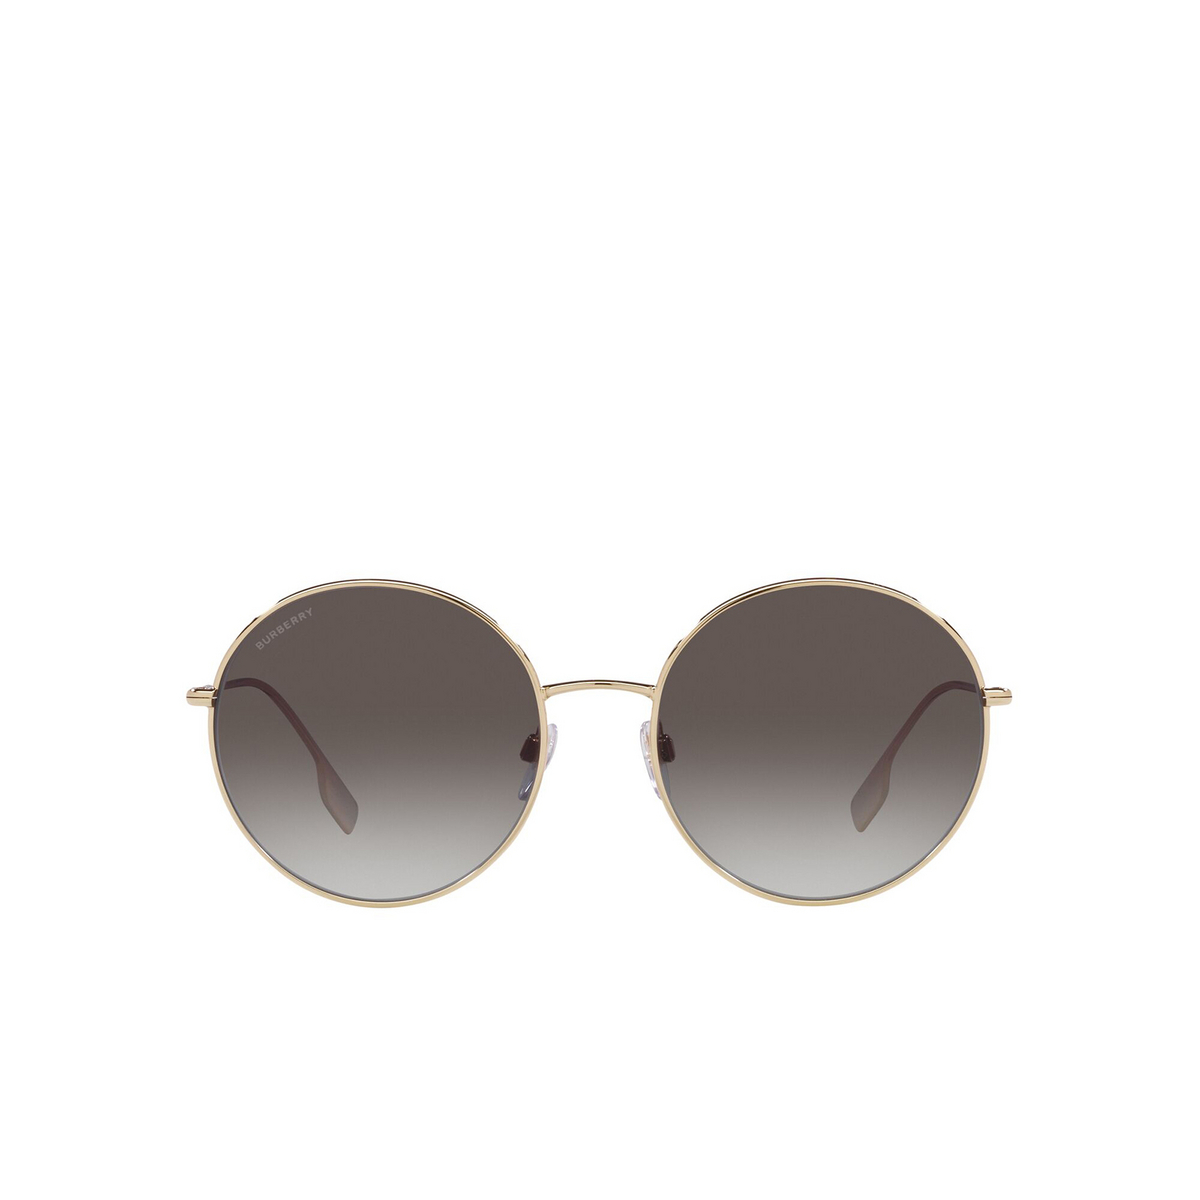 Burberry® Round Sunglasses: Pippa BE3132 color Light Gold 11098G - front view.